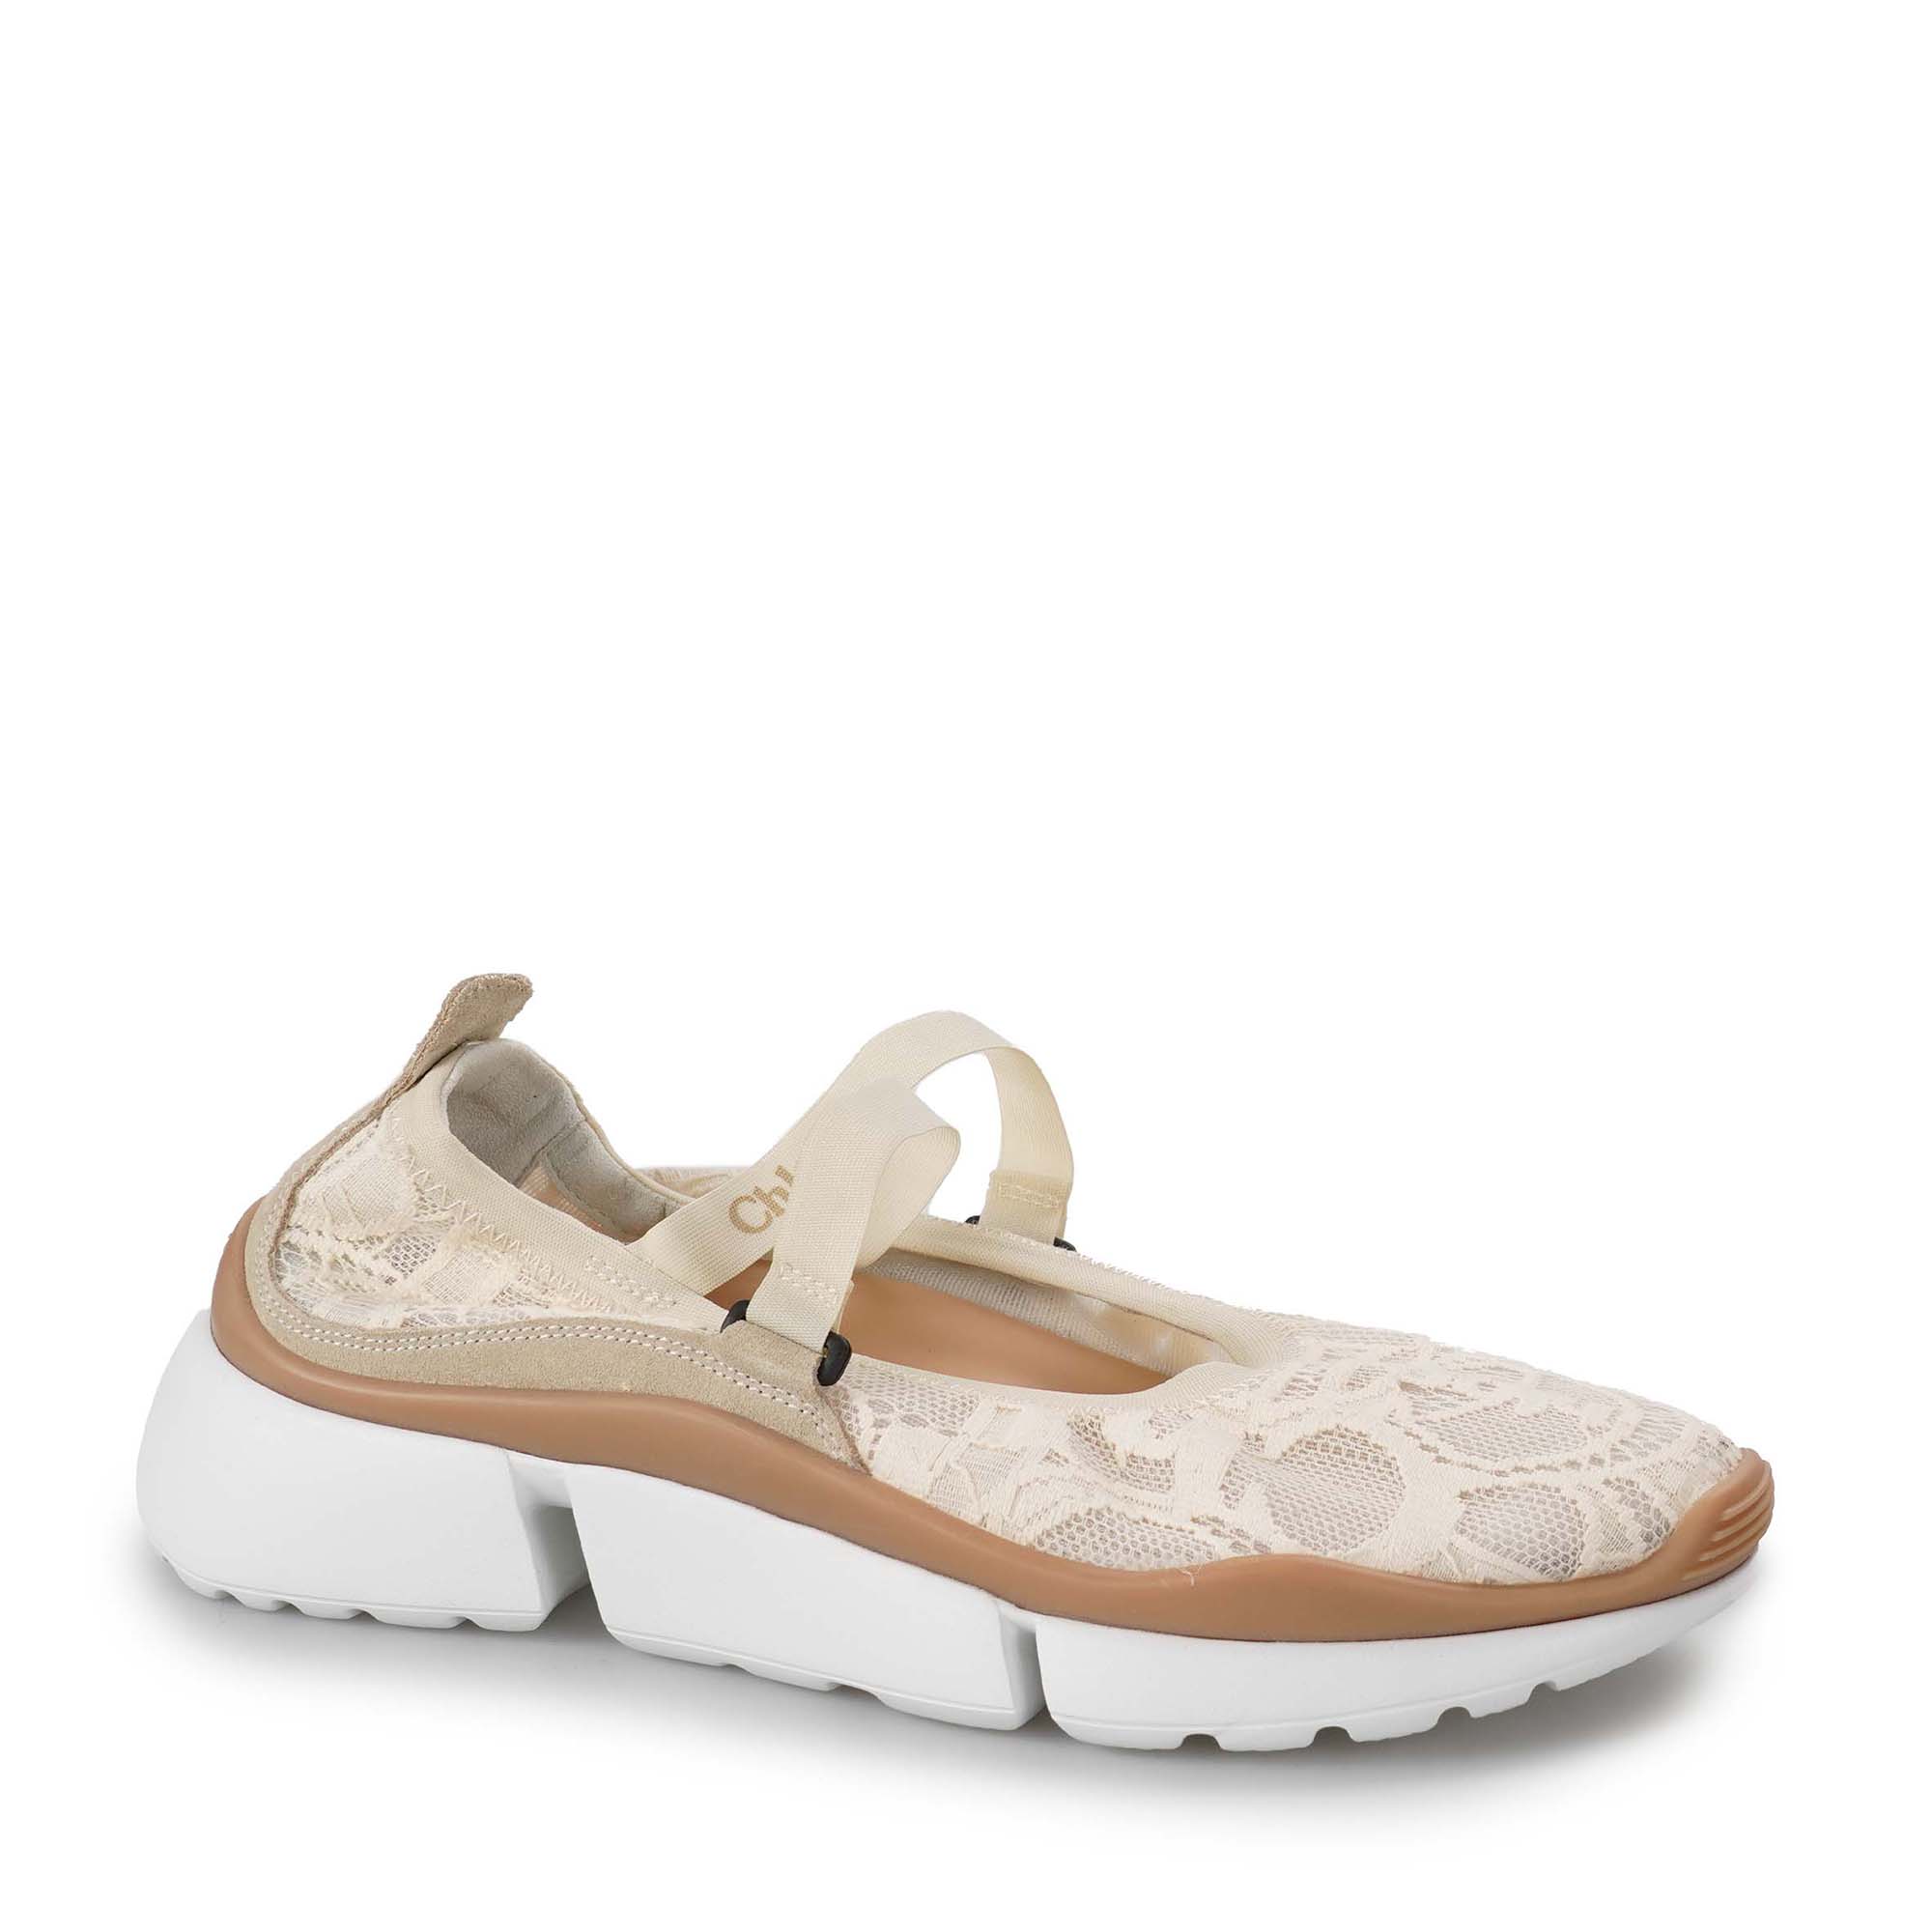 Chloe - Off White Lace Sonnie Ballet Sneakers 